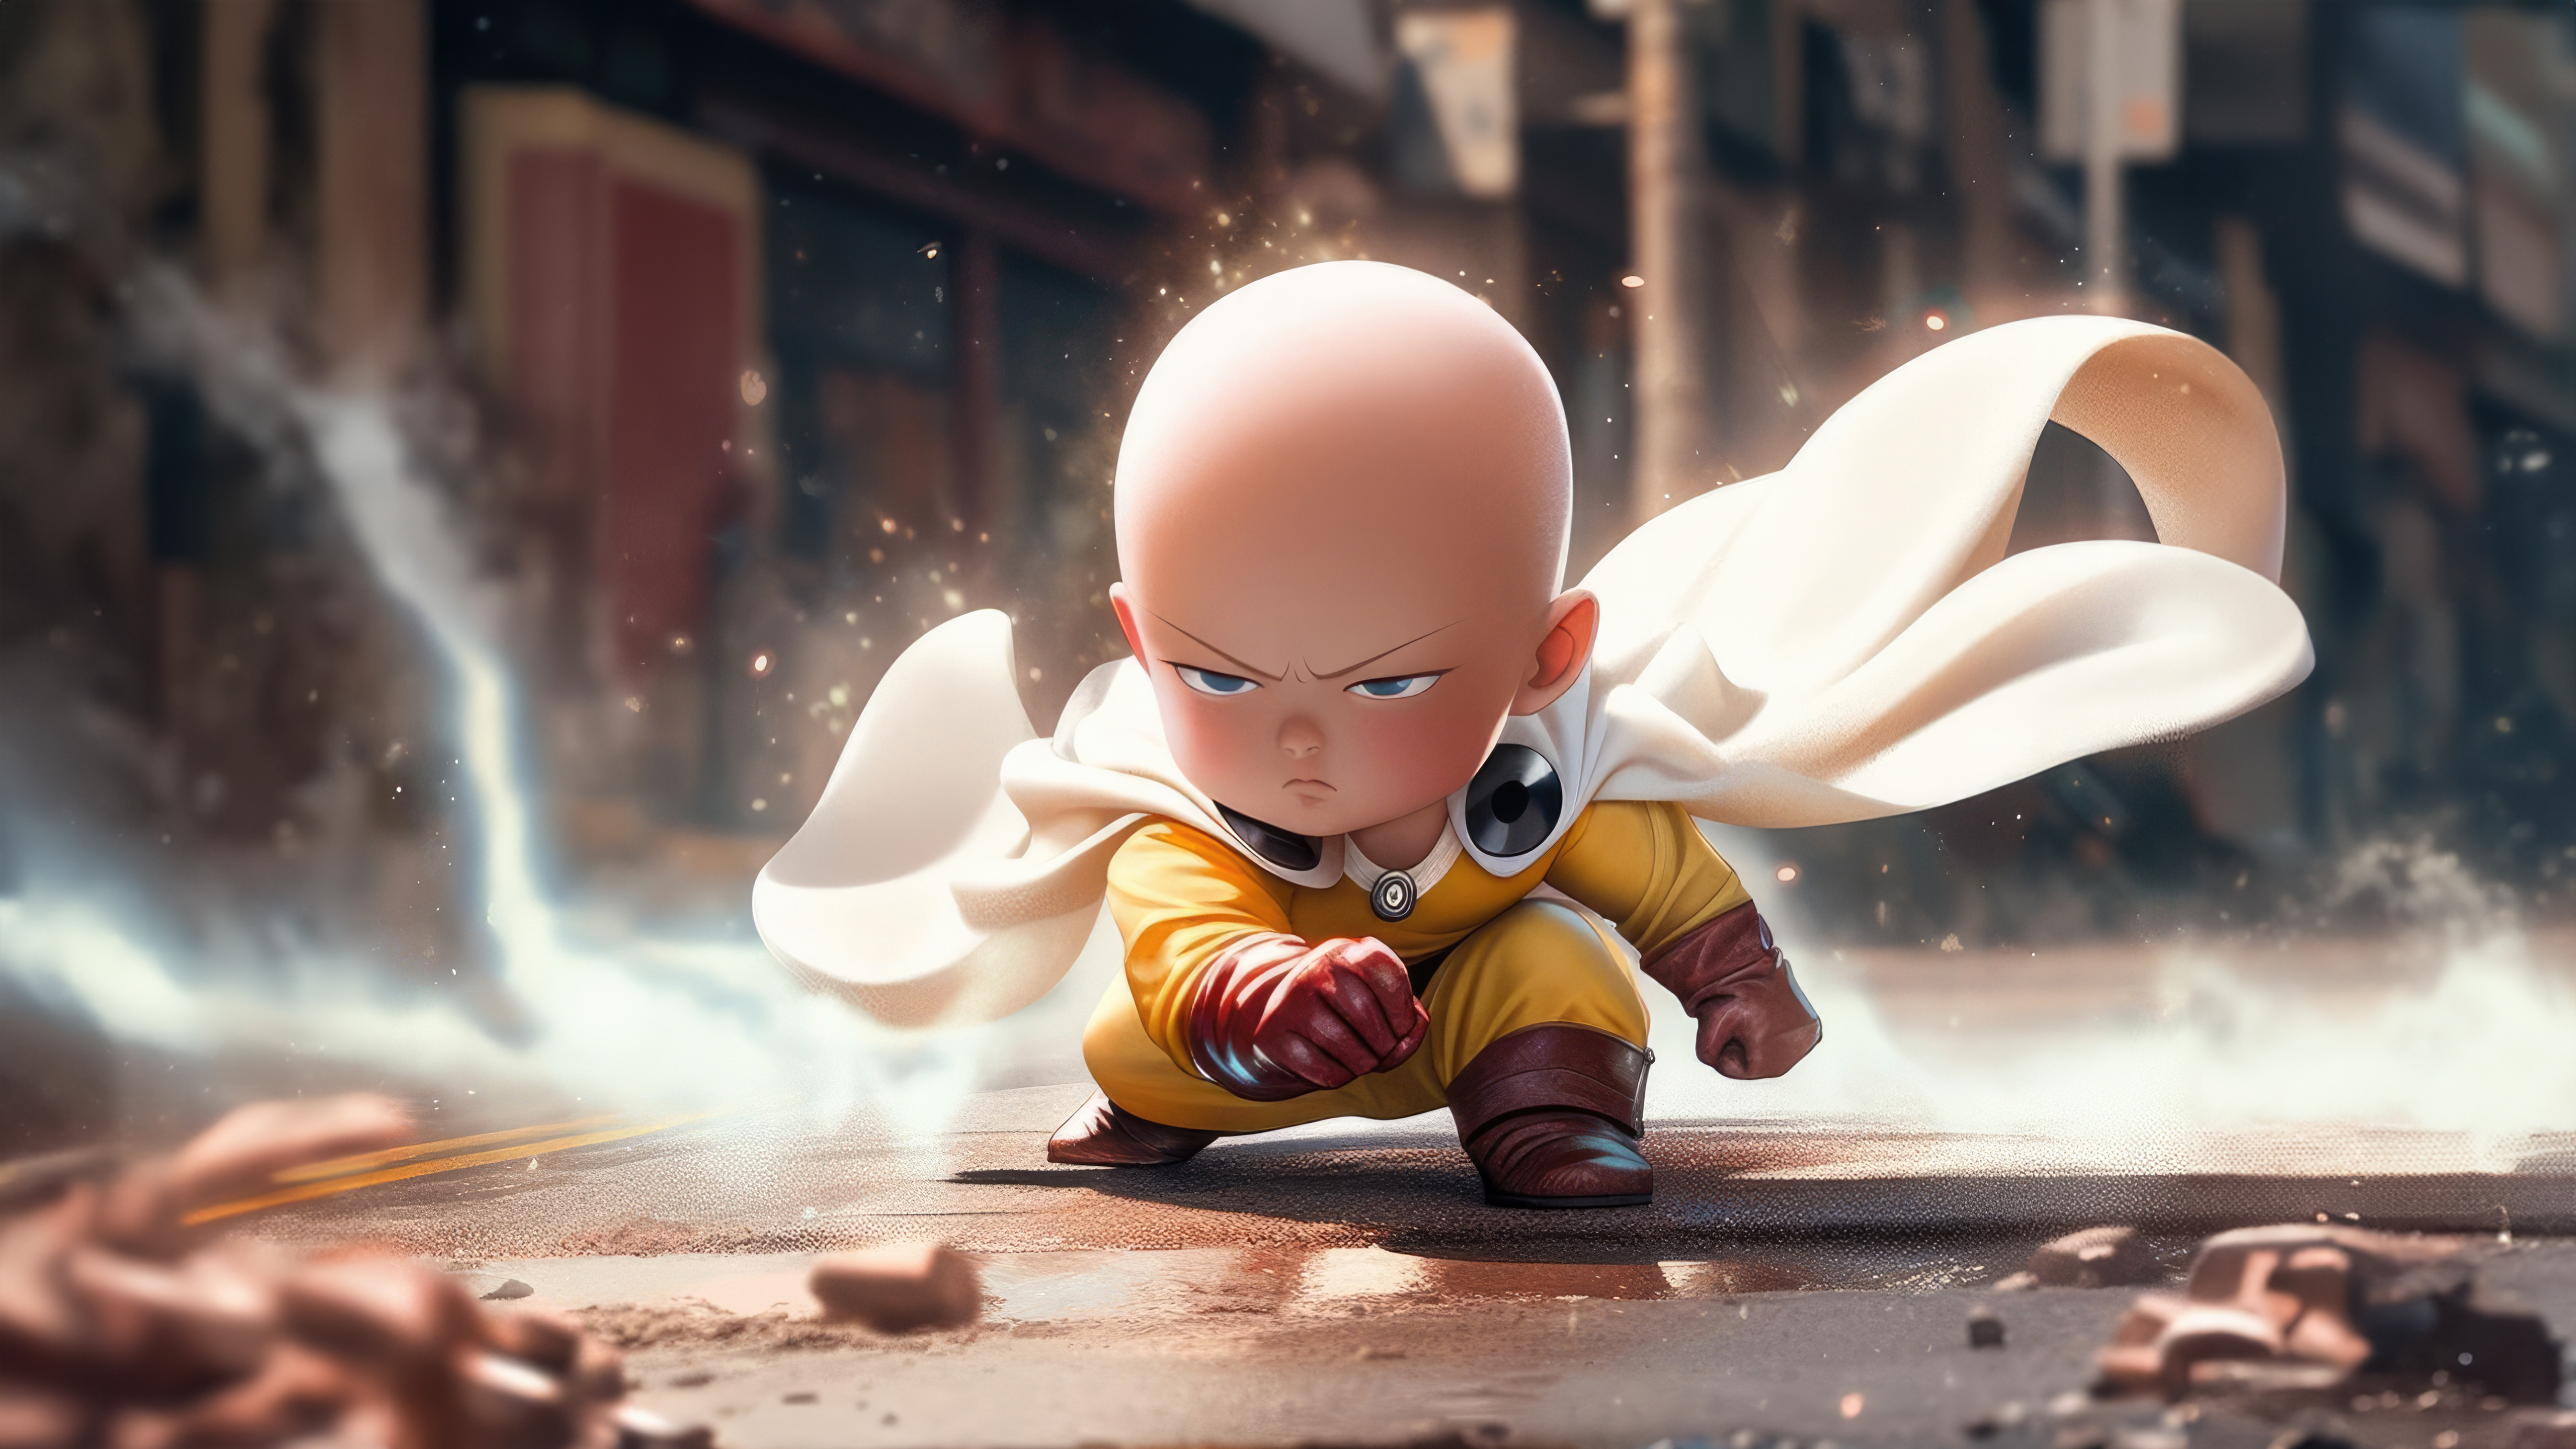 Poster99 One Punch Man Poster - Saitama Anime Wall Sticker 300 GSM Art Card  Paper Print Artwork, Printed (13x19 inch) : Amazon.in: Home & Kitchen